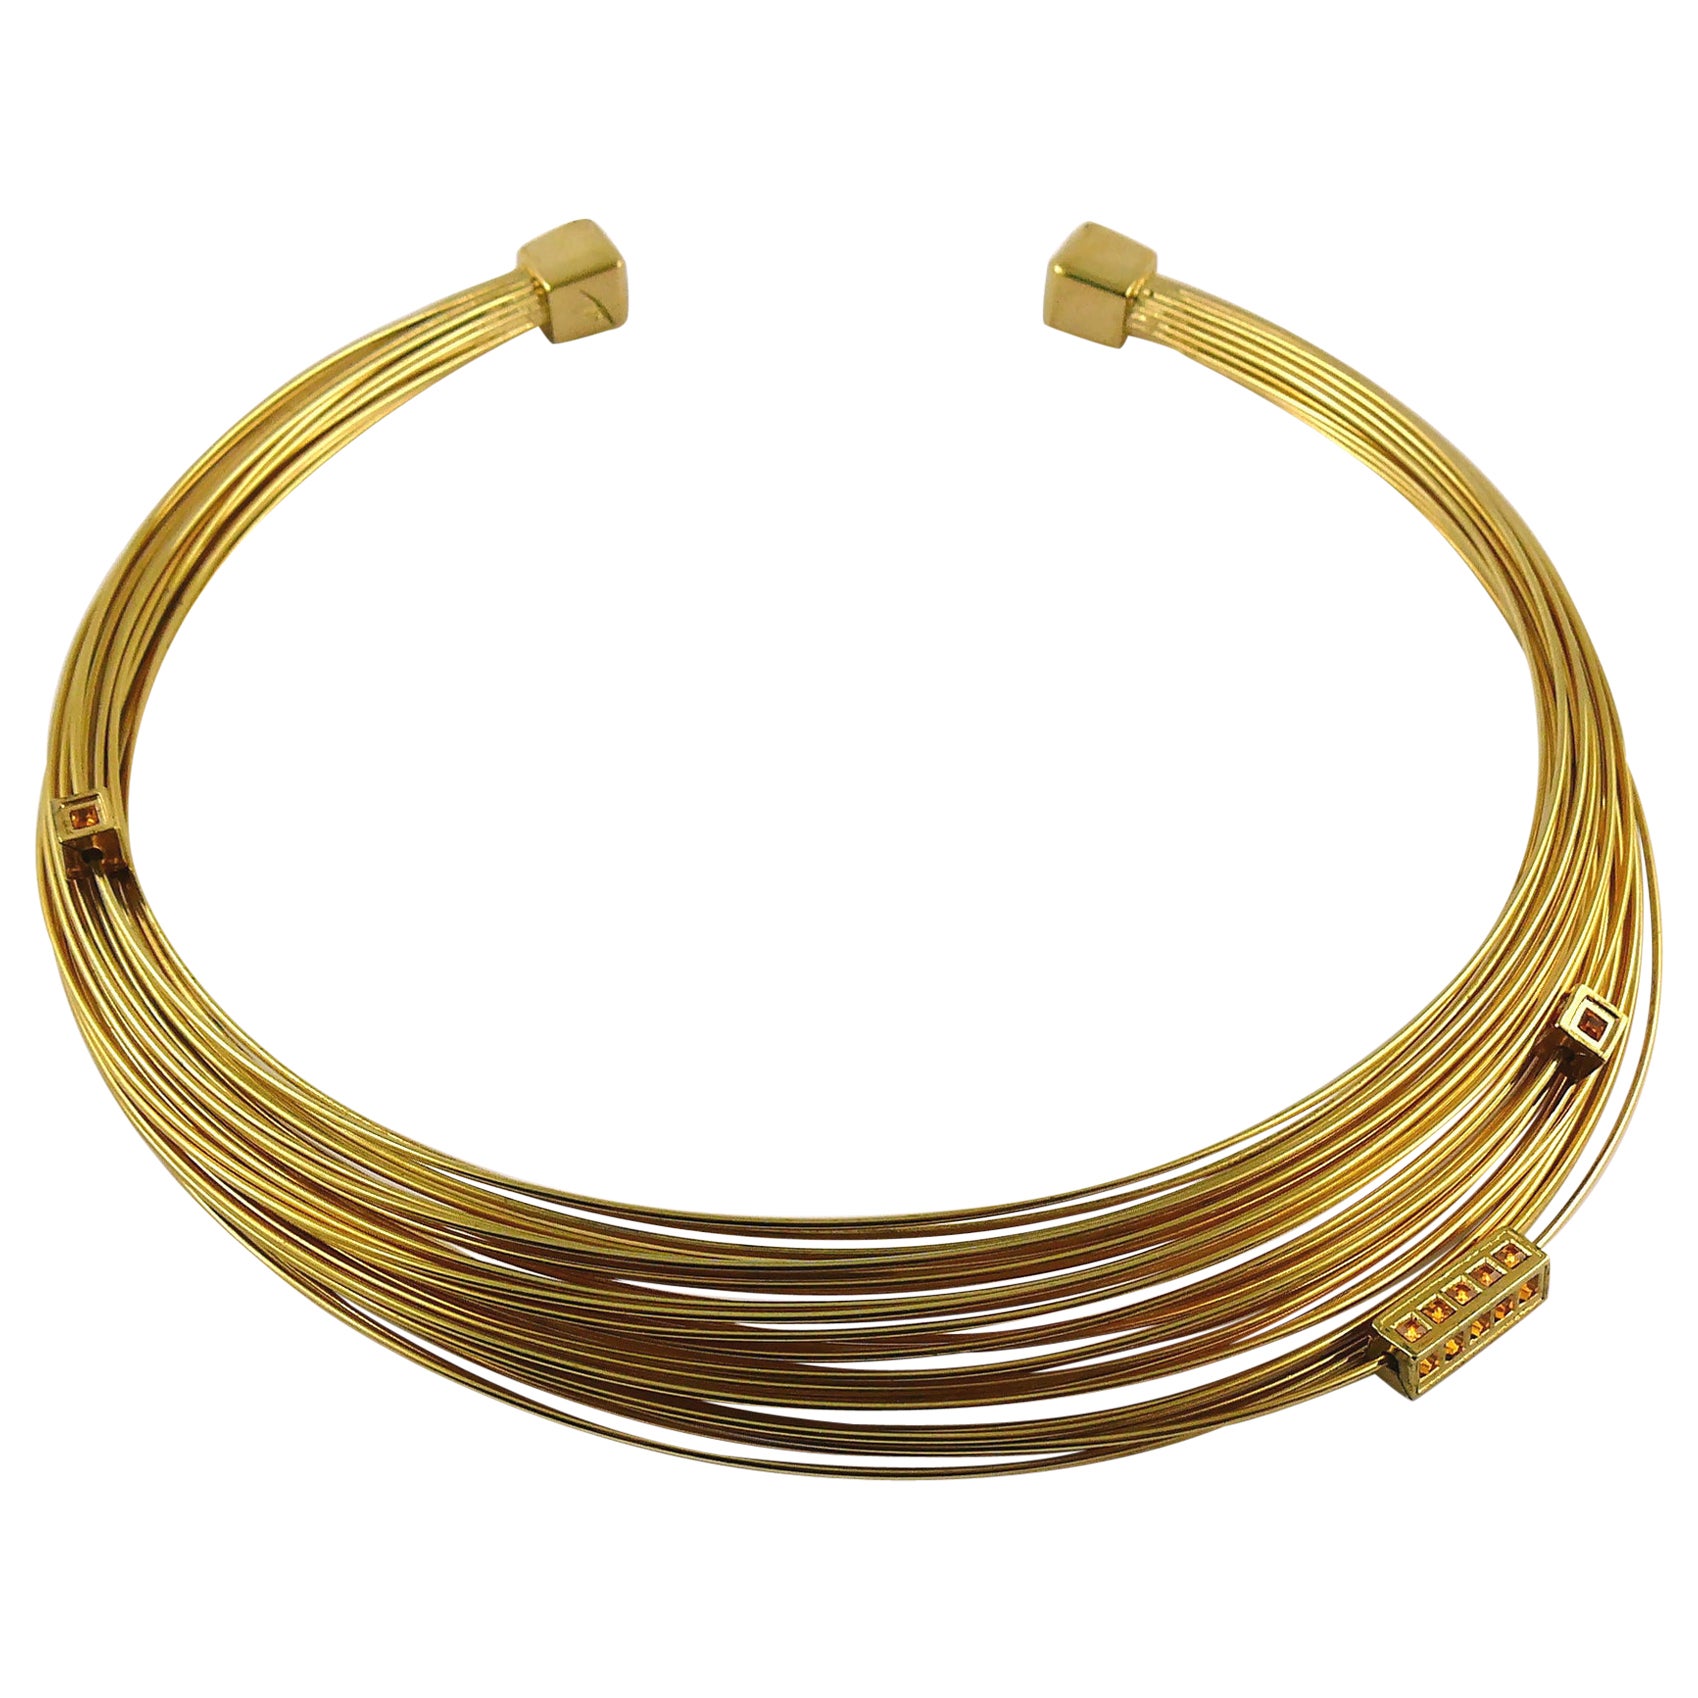 Thierry Mugler Gold Toned Bundled Wires Choker Necklace For Sale